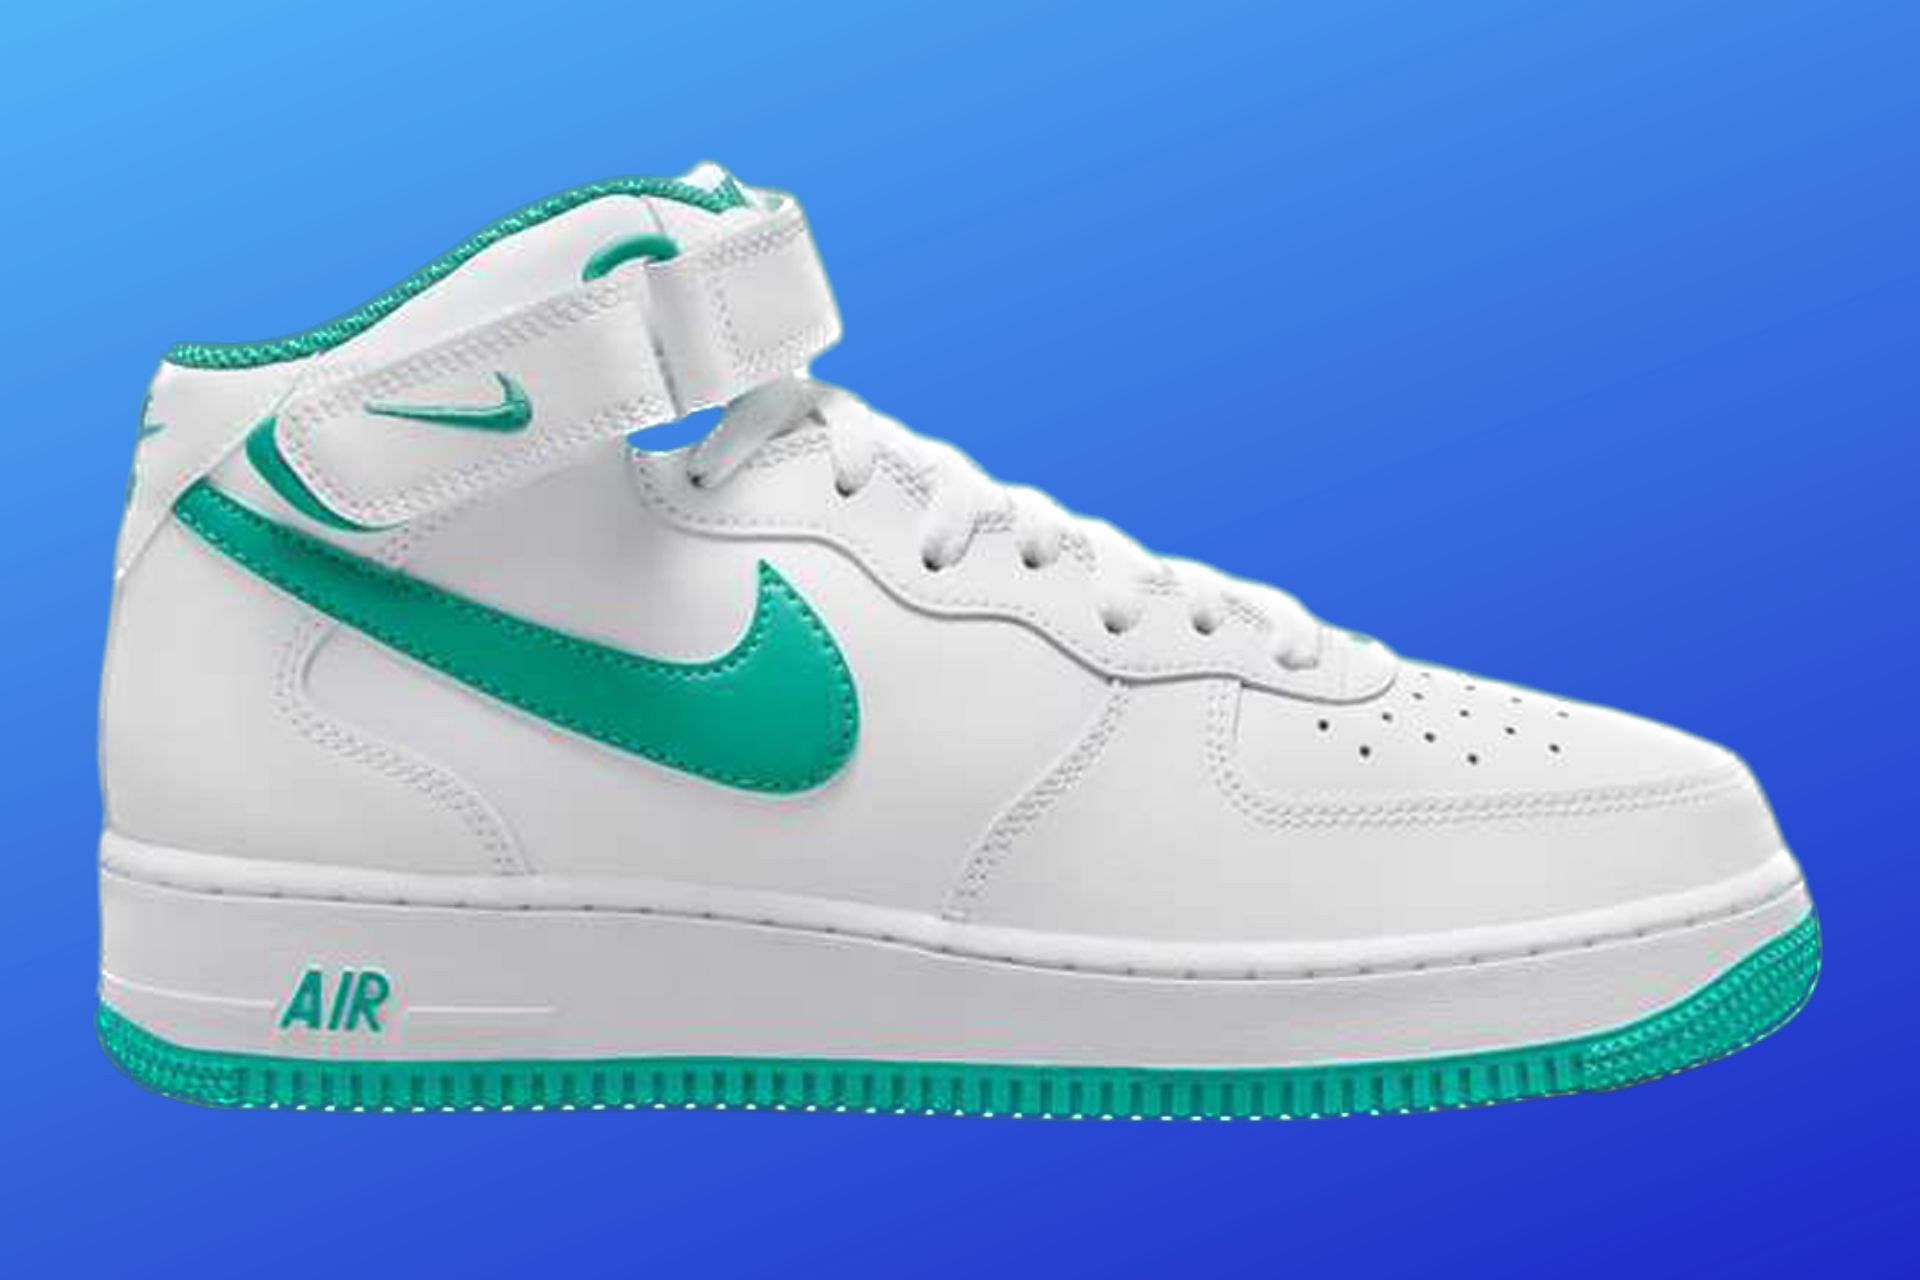 Nike Air Force 1 Low White Clear Jade shoes (Image via Nike)